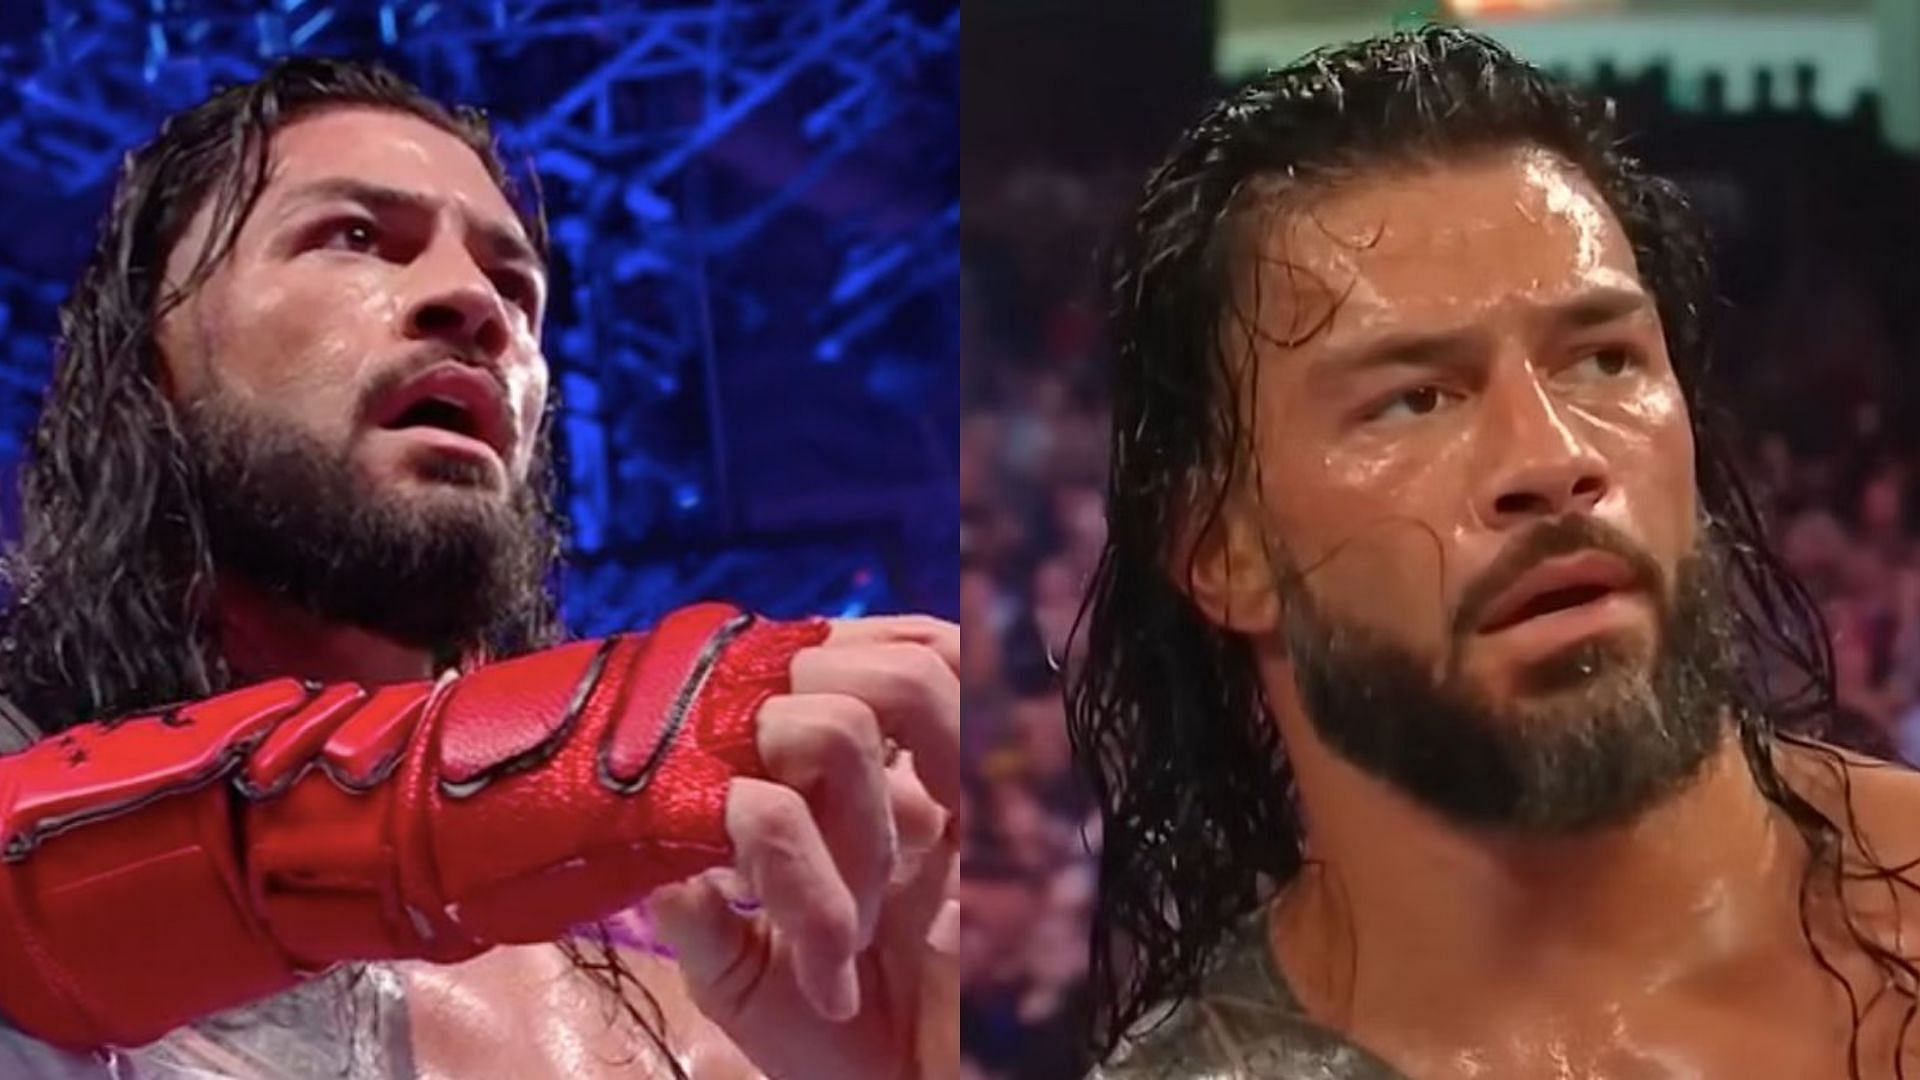 Roman Reigns has led a strong Bloodline over the last few years